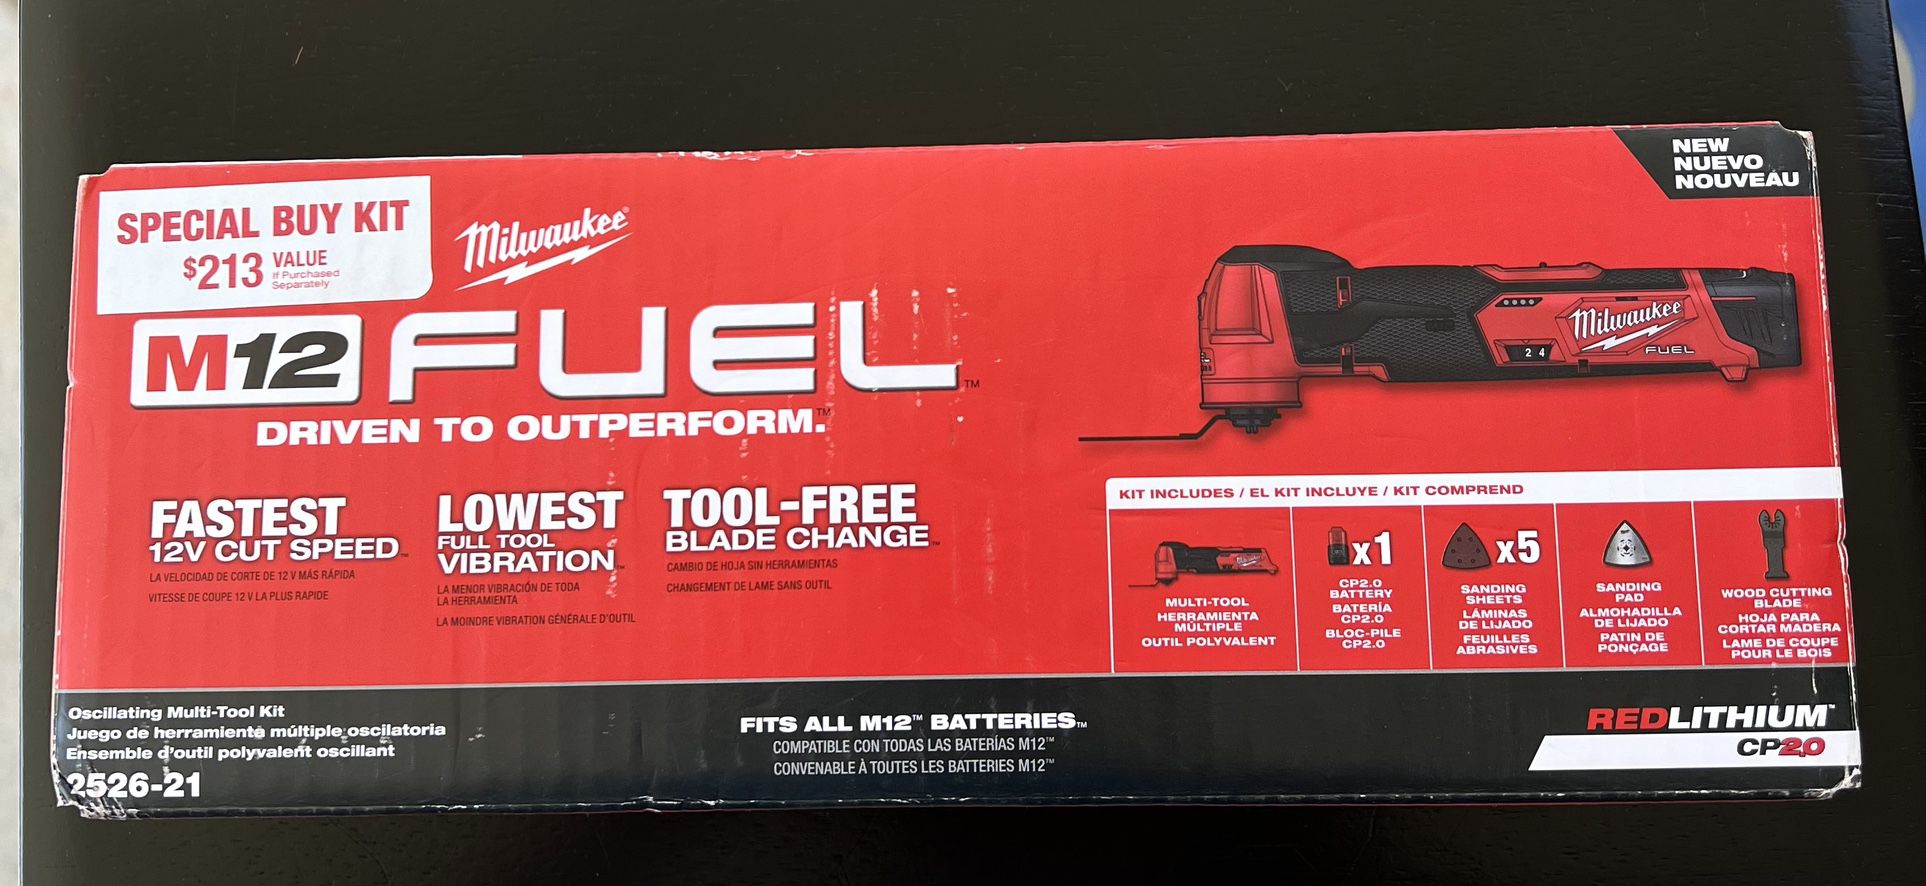 Milwaukee M12 FUEL 12V Lithium-Ion Cordless Oscillating Multi-Tool Kit w/ Compact 2.0 Ah Battery